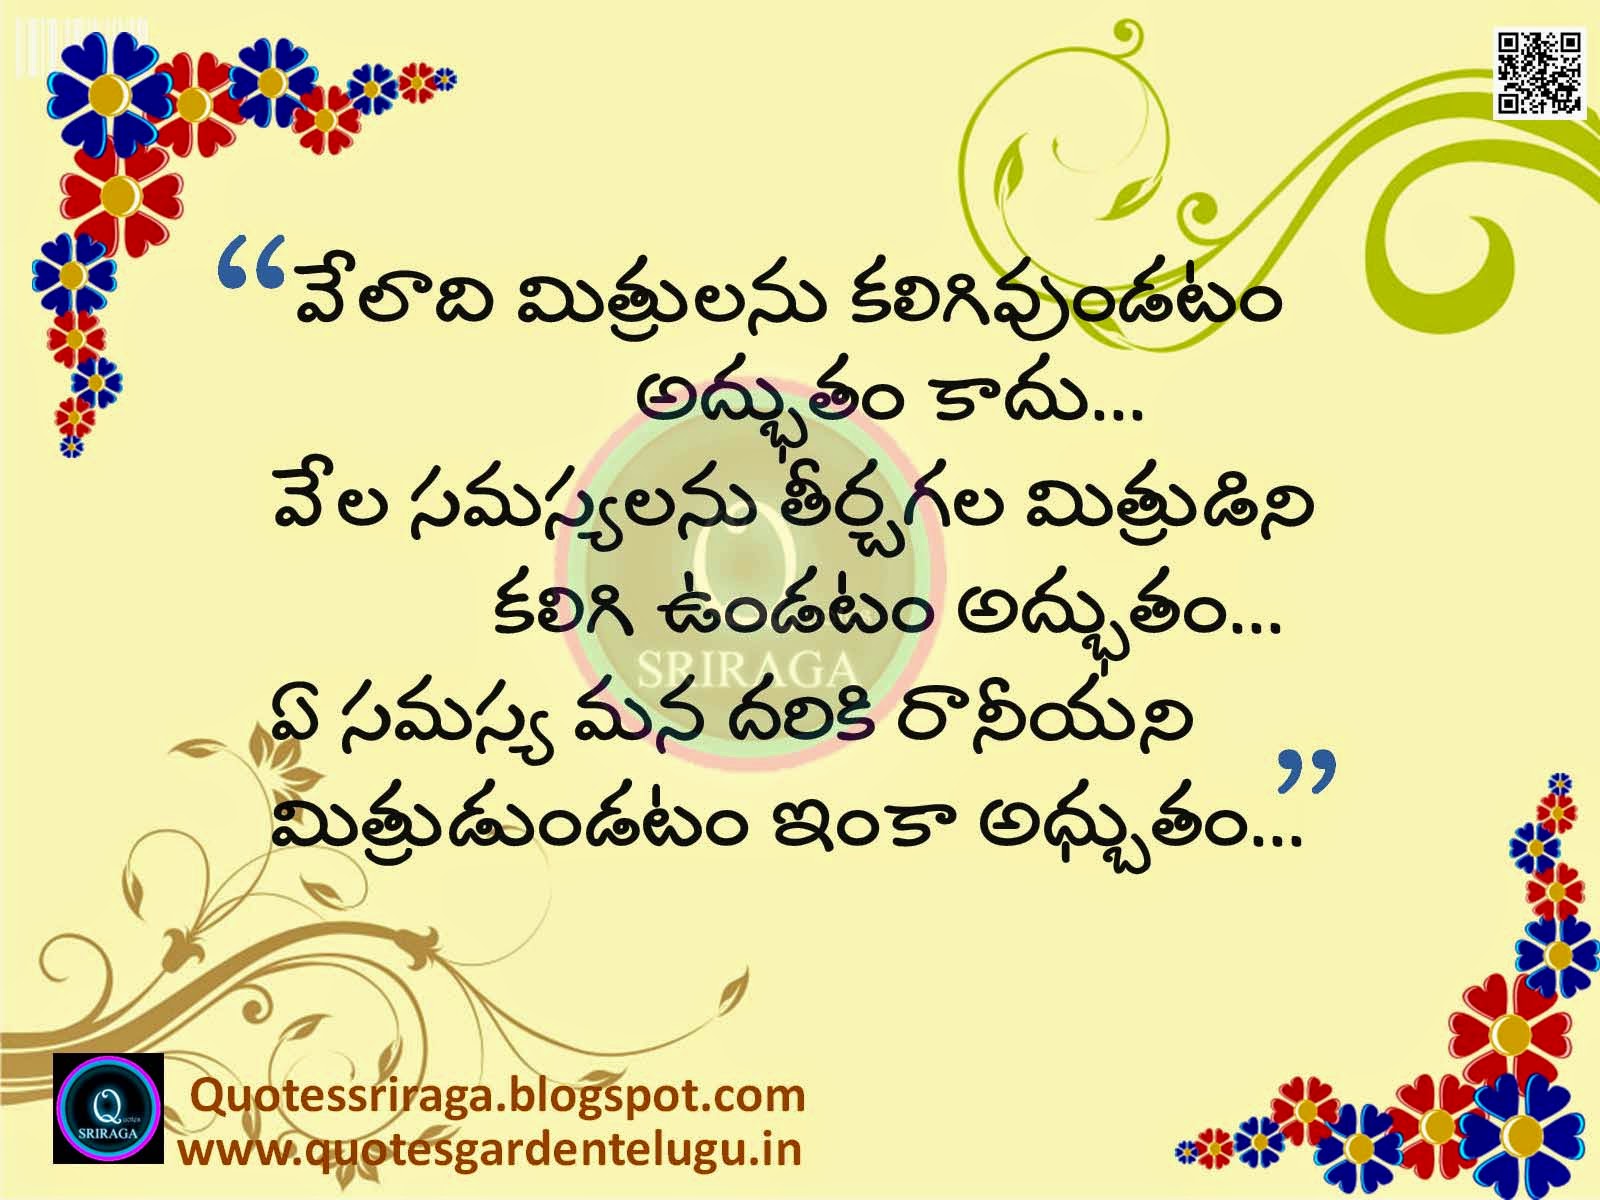 Friendship Quotes Nice Telugu Inspirational Quotes with 456 images